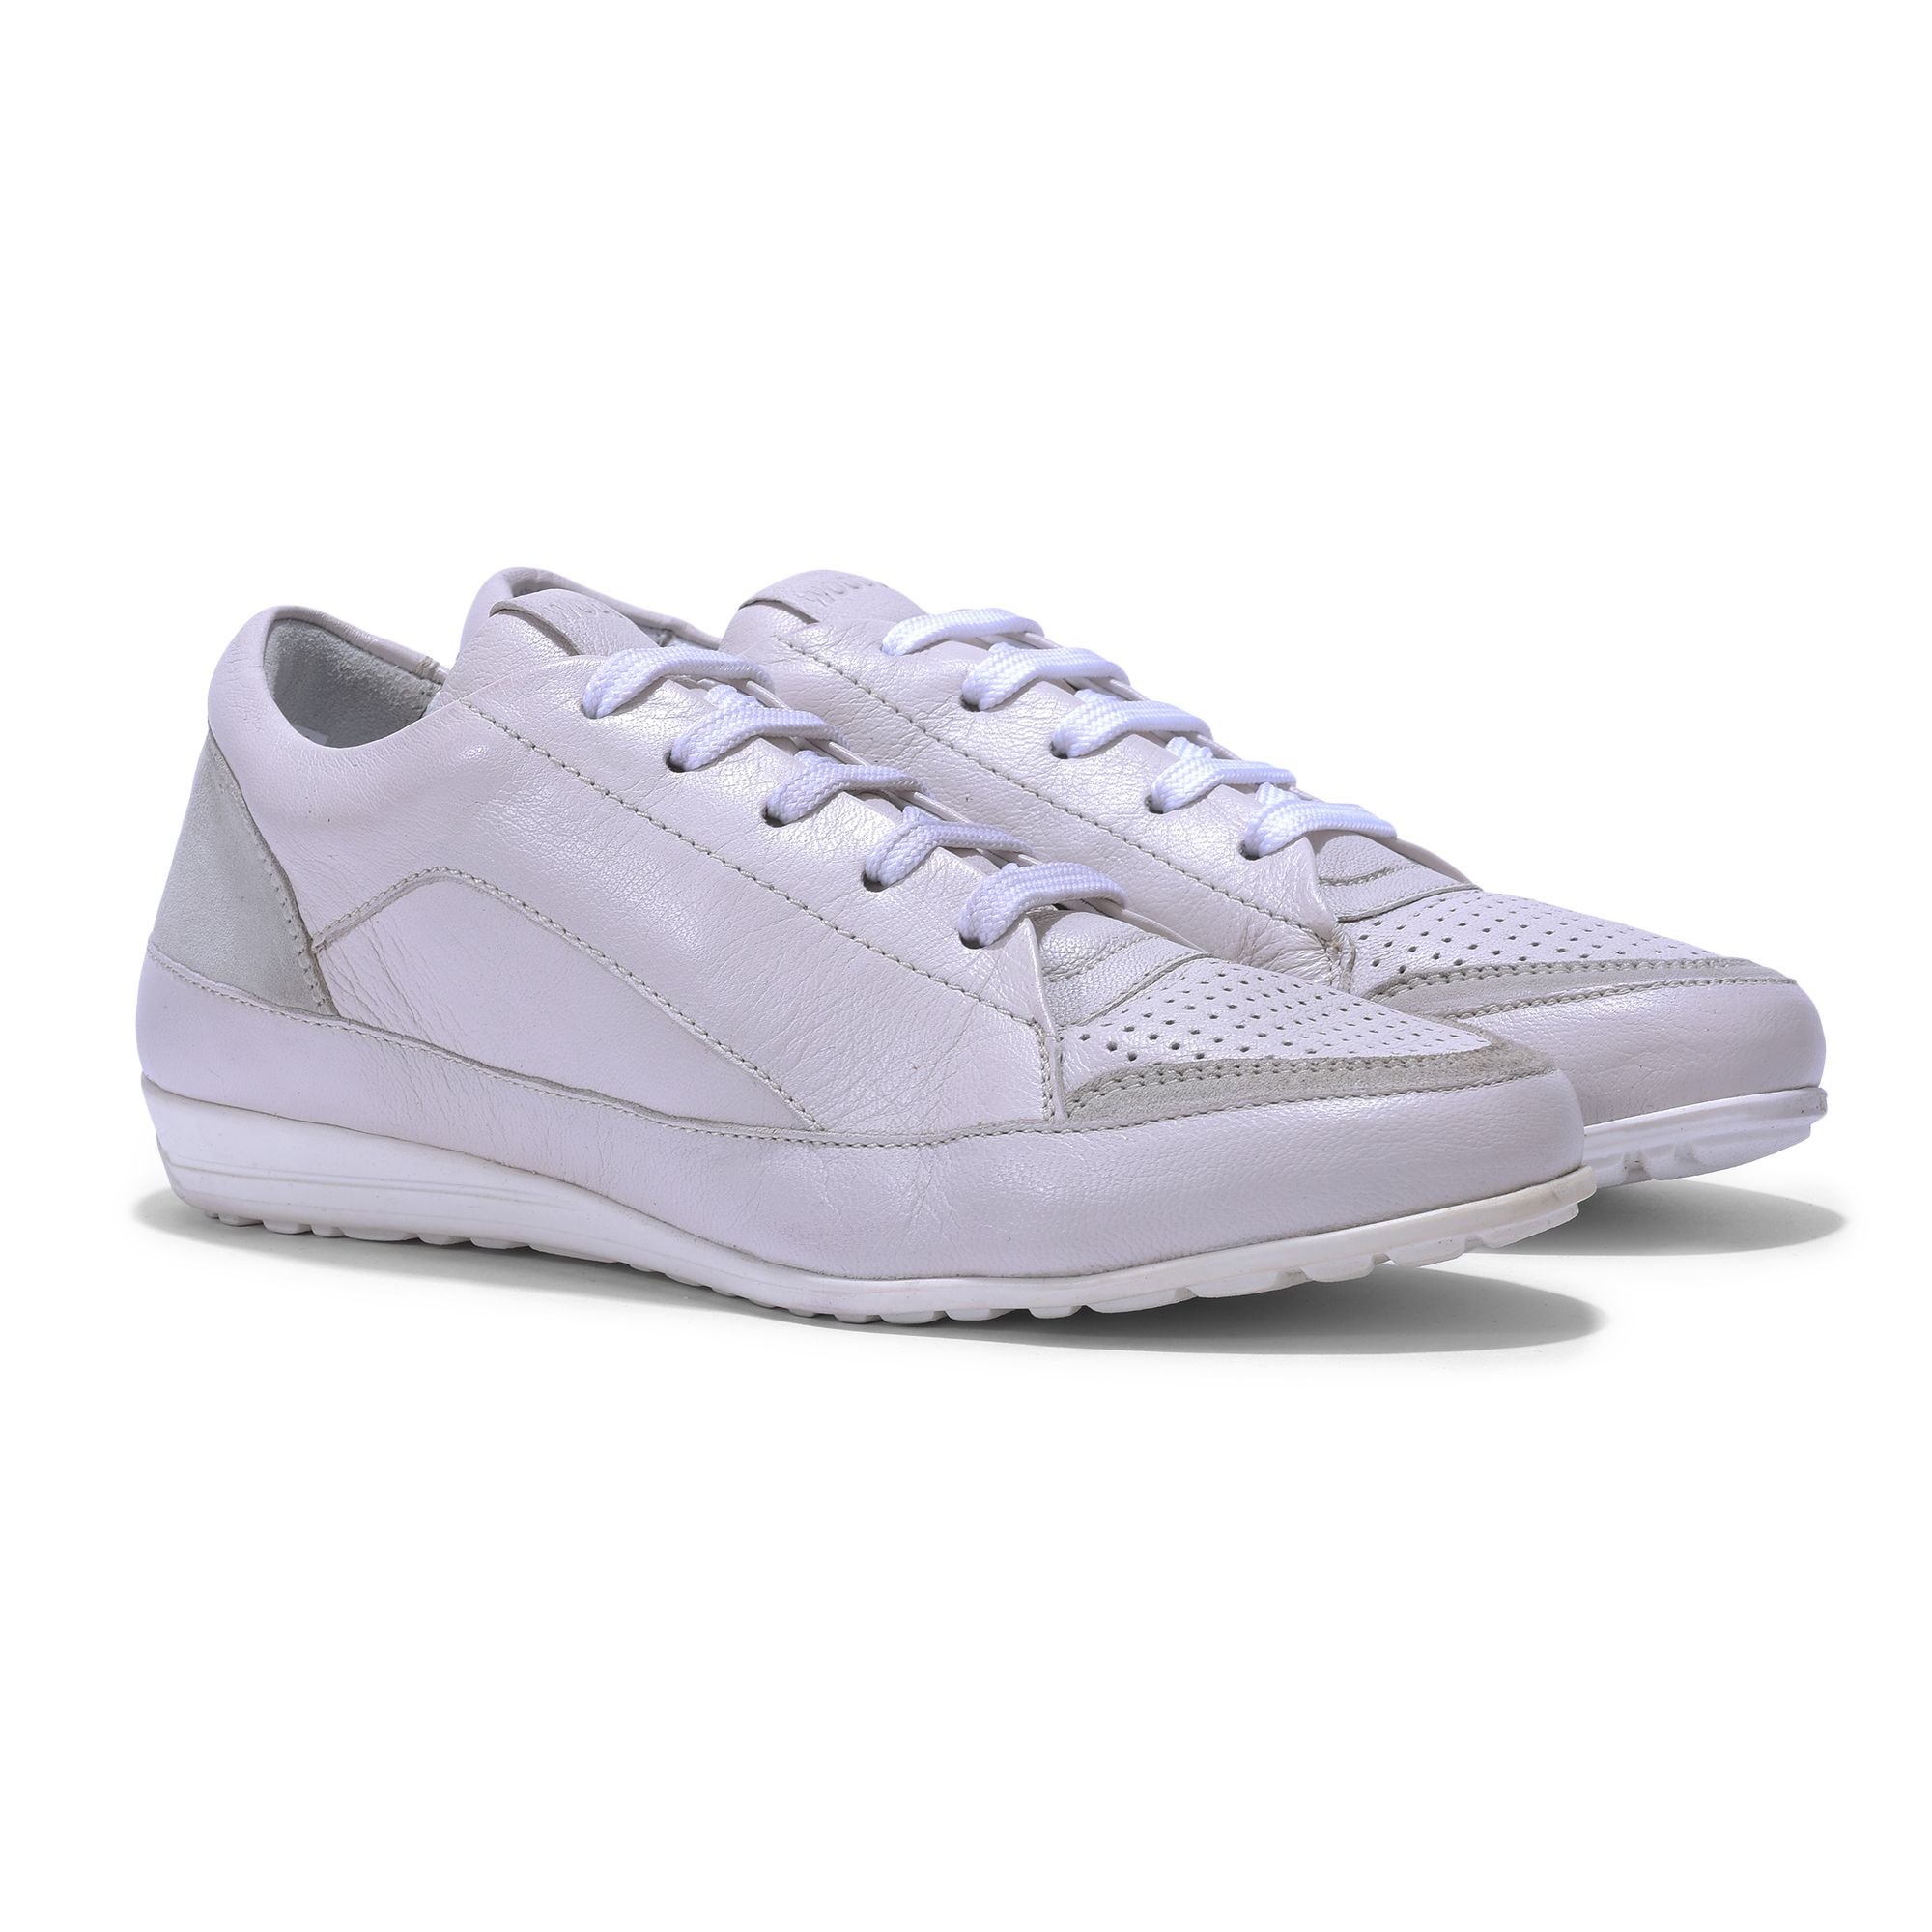 Woodland owhite casual sneakers for women